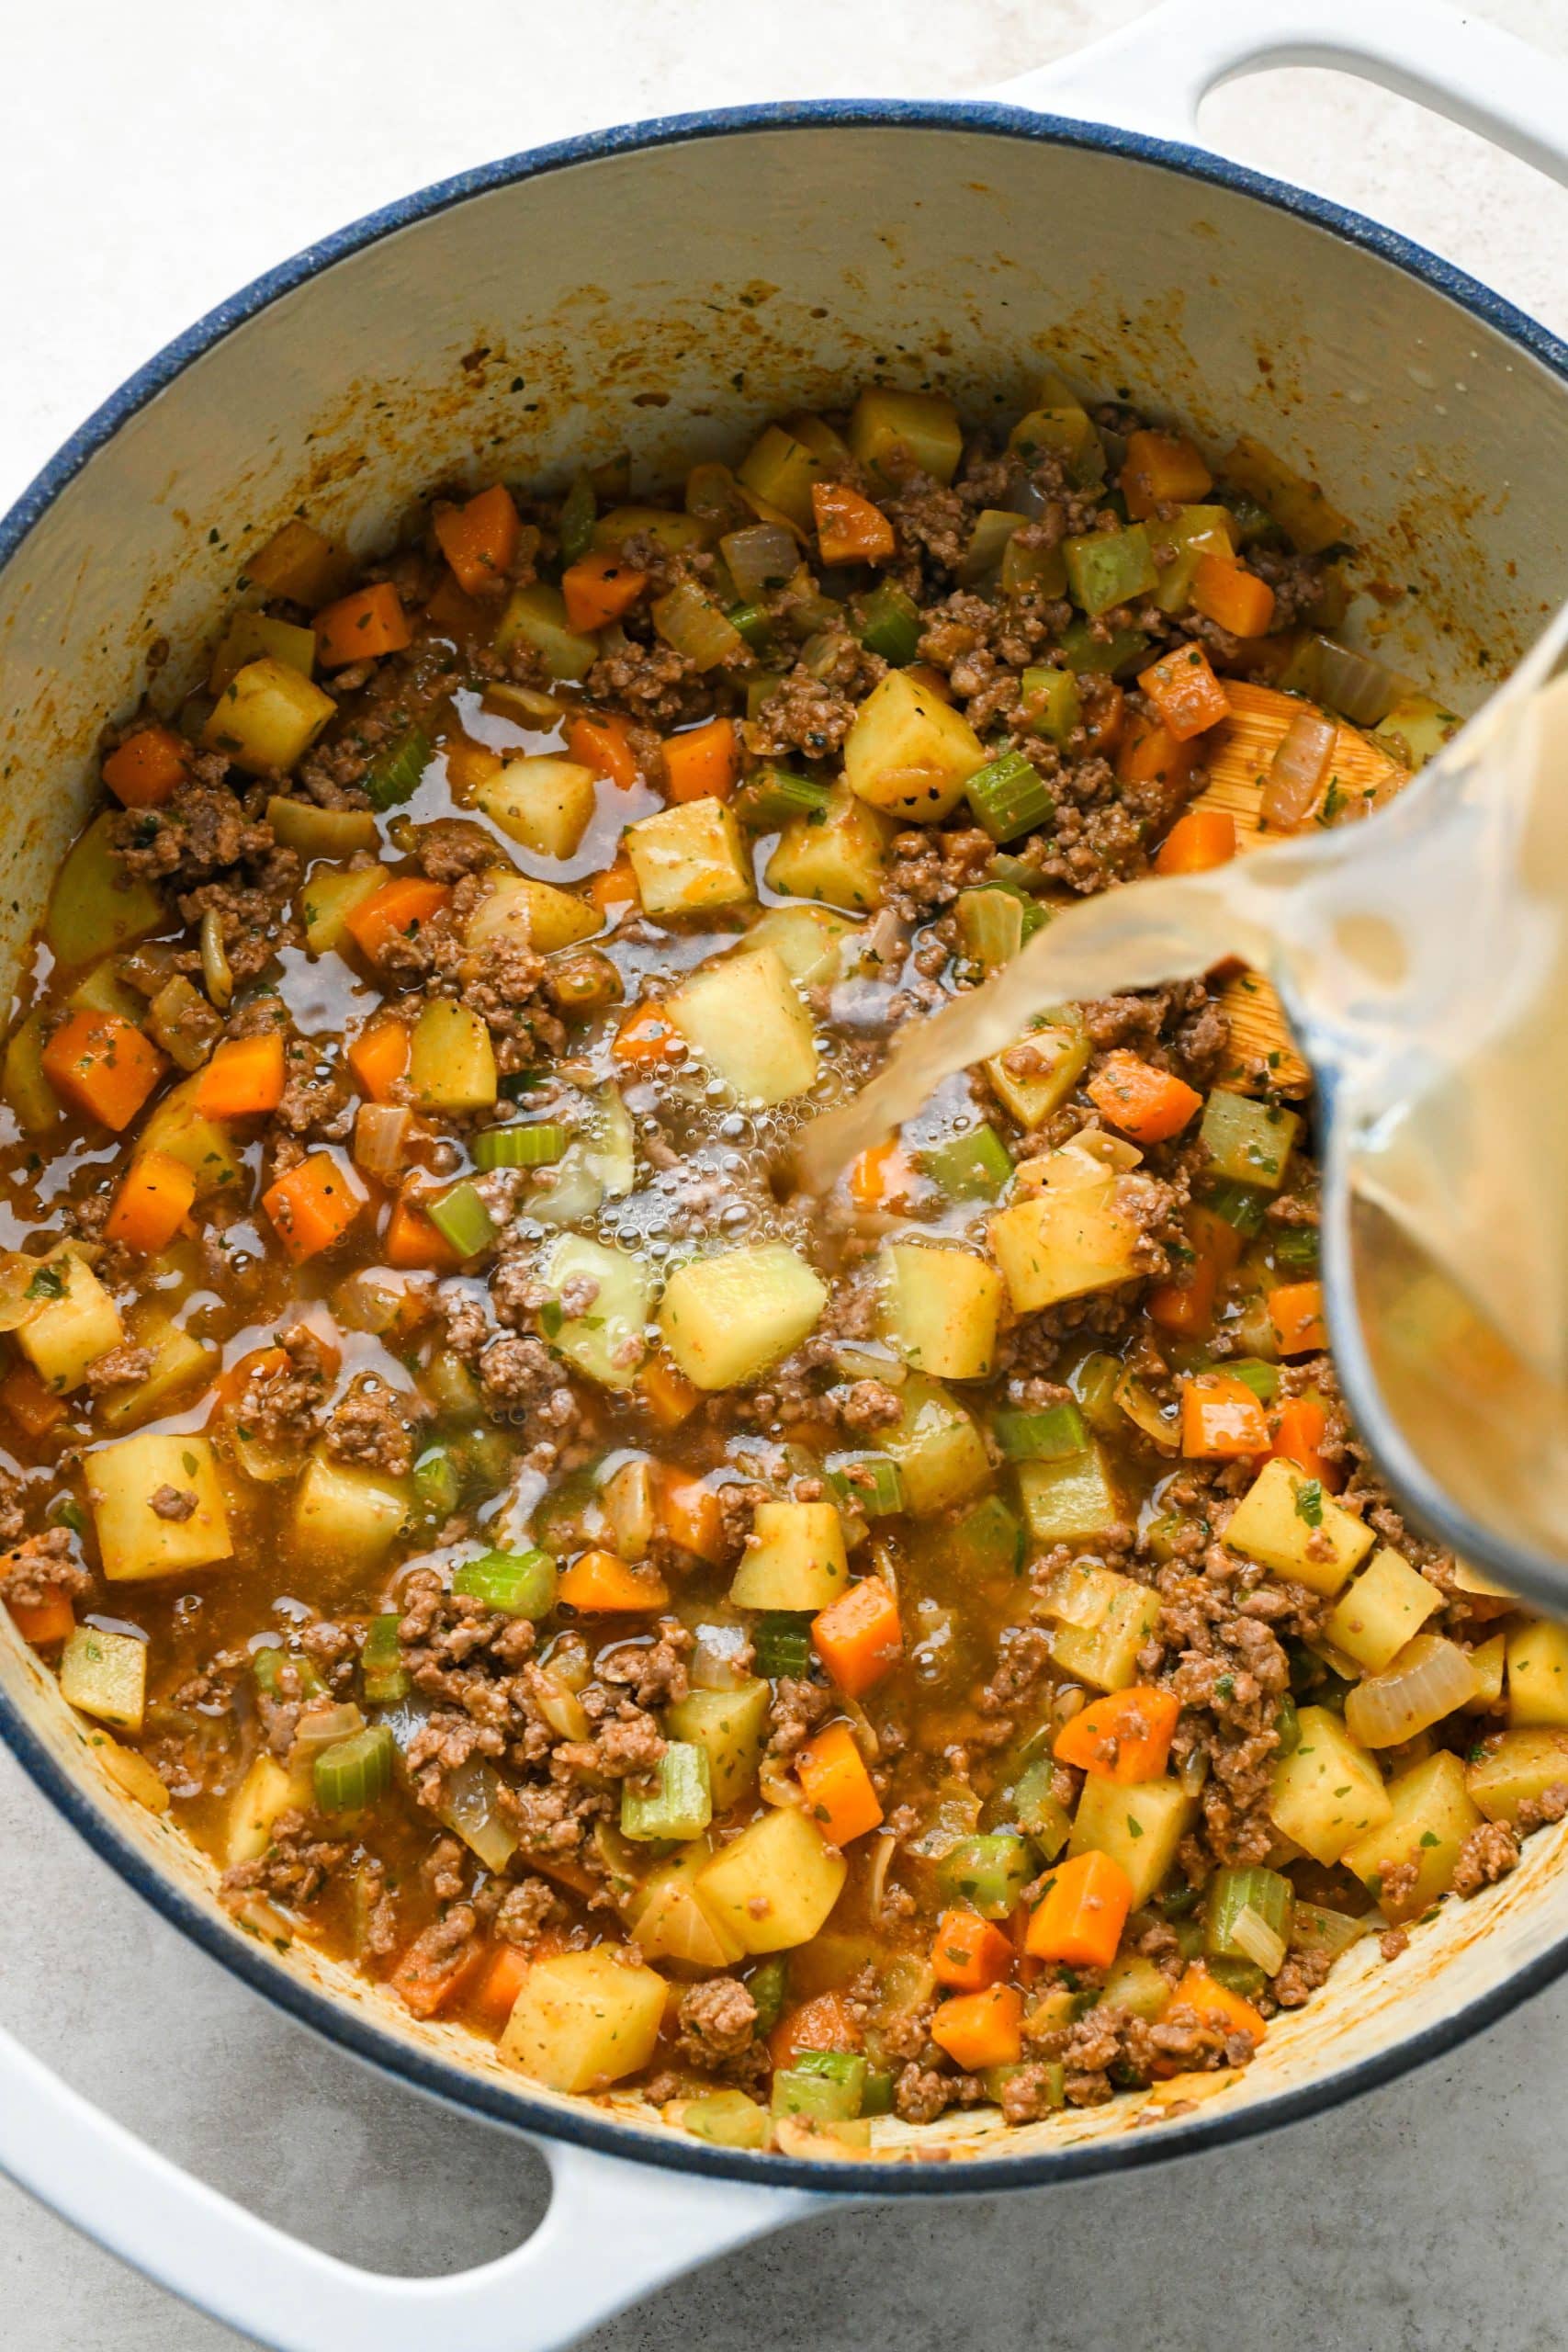 How to make shepherds pie soup: Pouring broth into the soup pot.